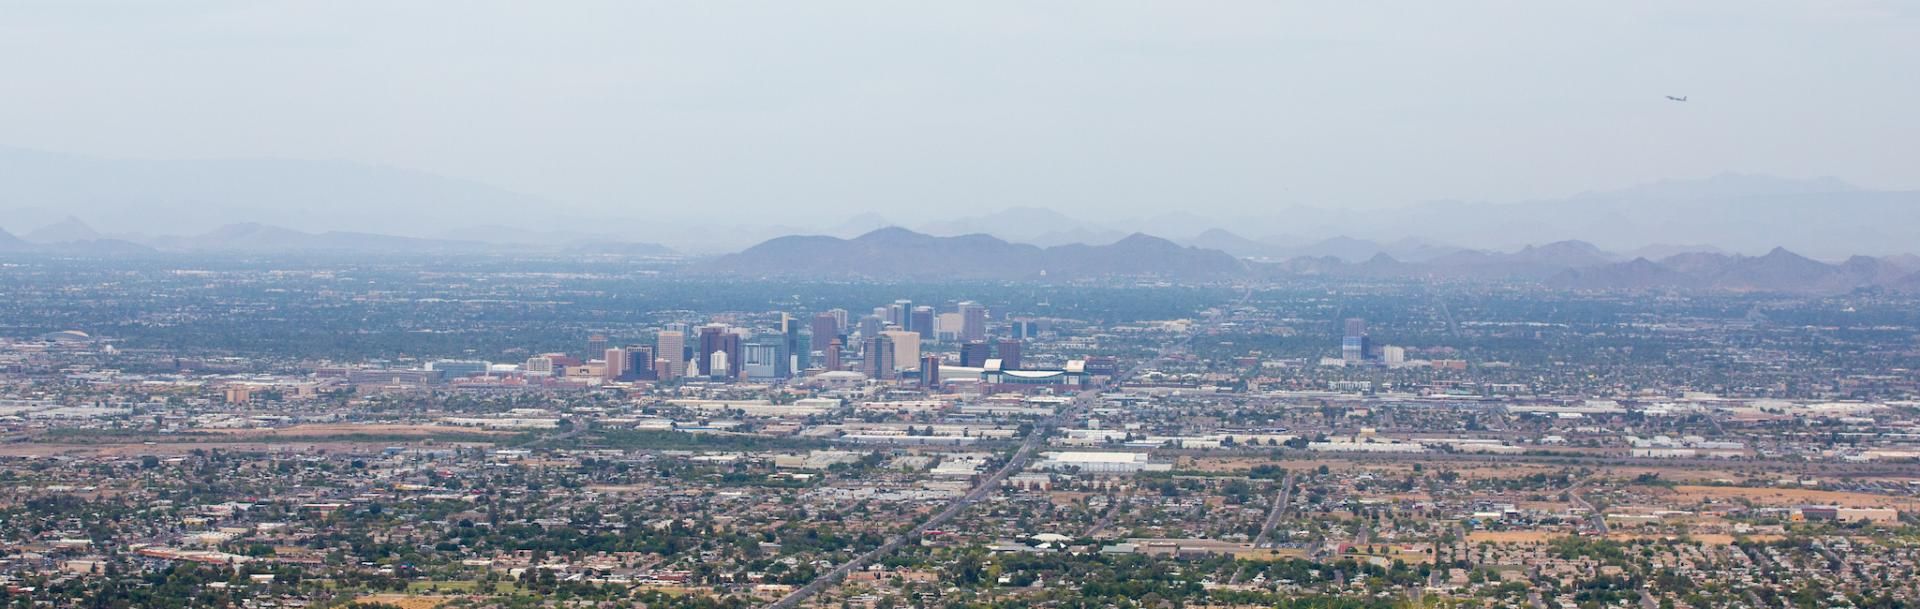 Phoenix landscape of city and valley with mountains in background